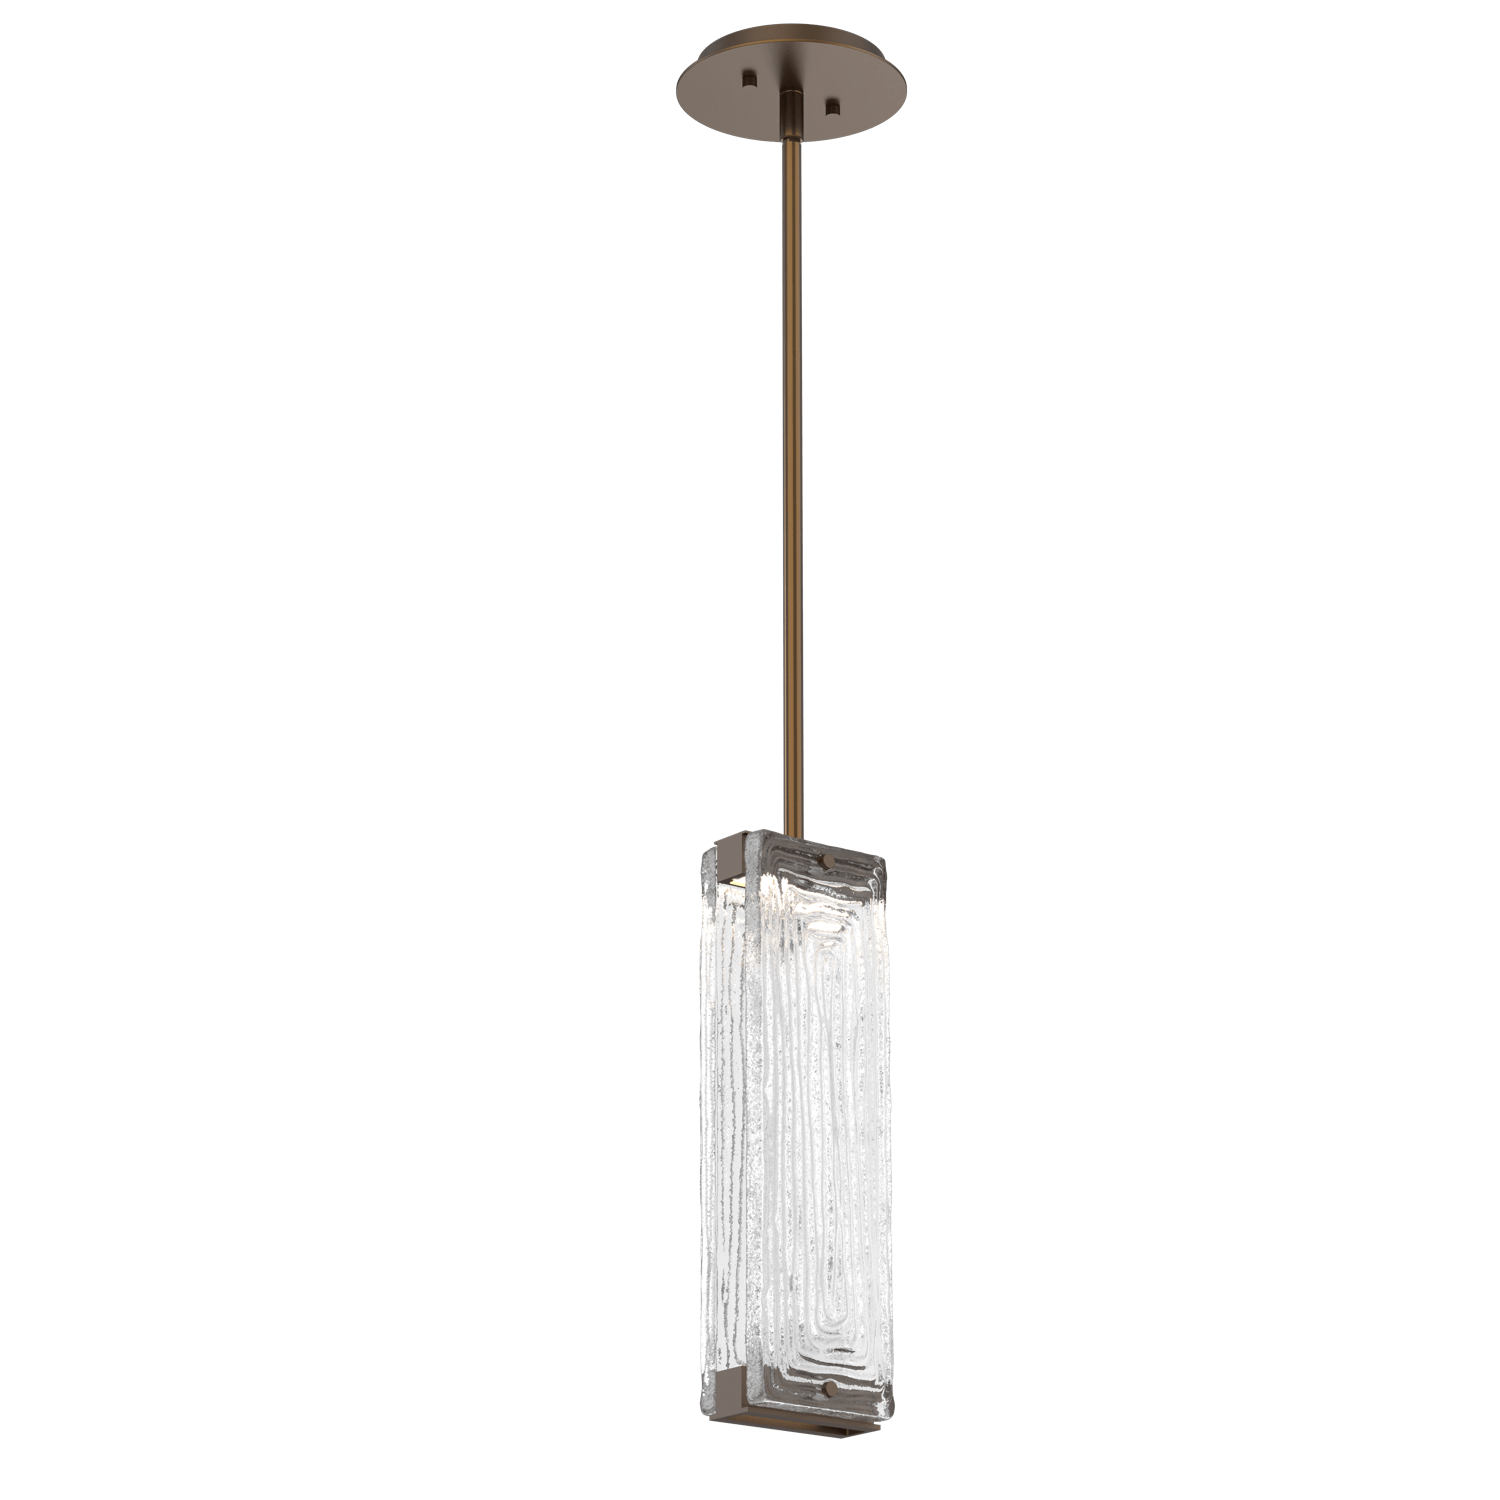 LAB0090-01-FB-TL-Hammerton-Studio-Tabulo-pendant-light-with-flat-bronze-finish-and-clear-linea-cast-glass-shade-and-LED-lamping